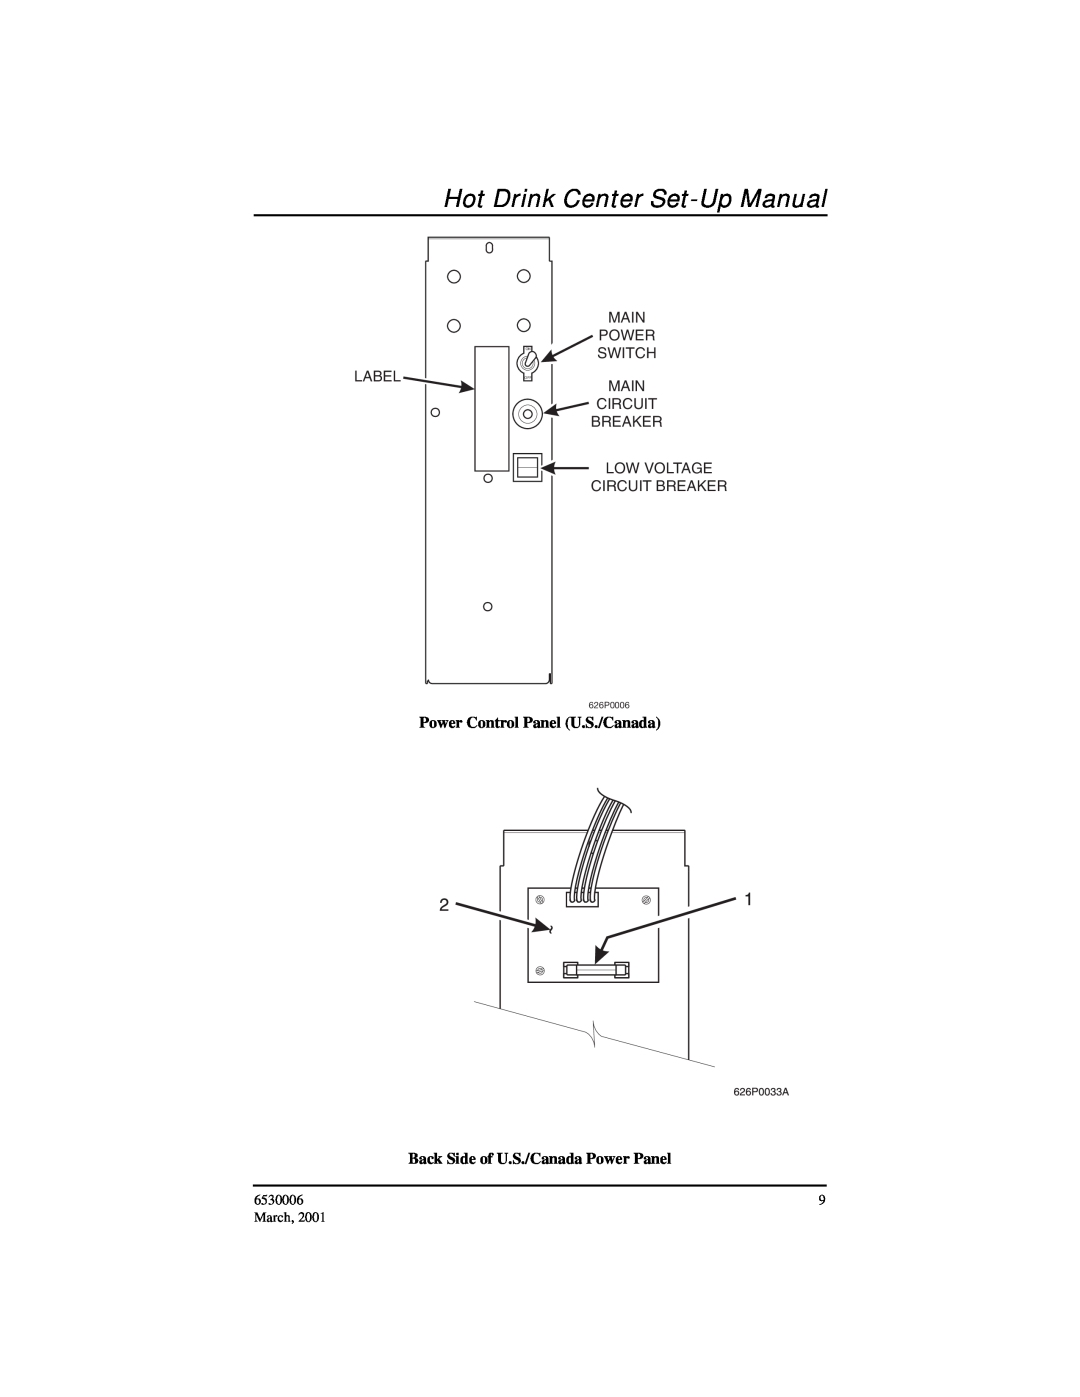 Crane Merchandising Systems 6530006 manual Hot Drink Center Set-Up Manual, Label, Main Power Onswitch, March, 626P0006 